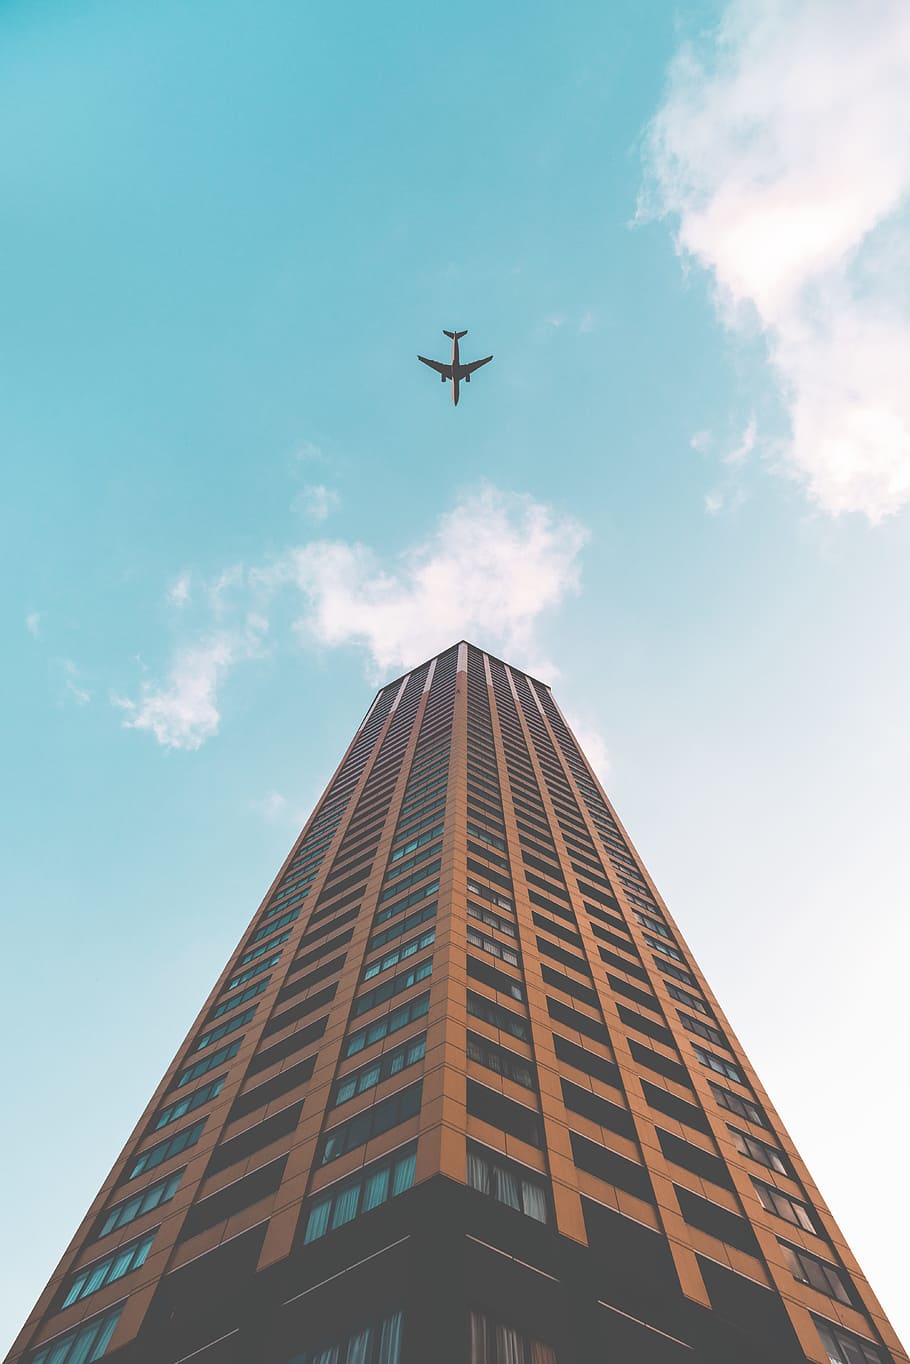 bottom view shot of airplane flying above high rise building, white airliner flying over brown high rise building during daytime